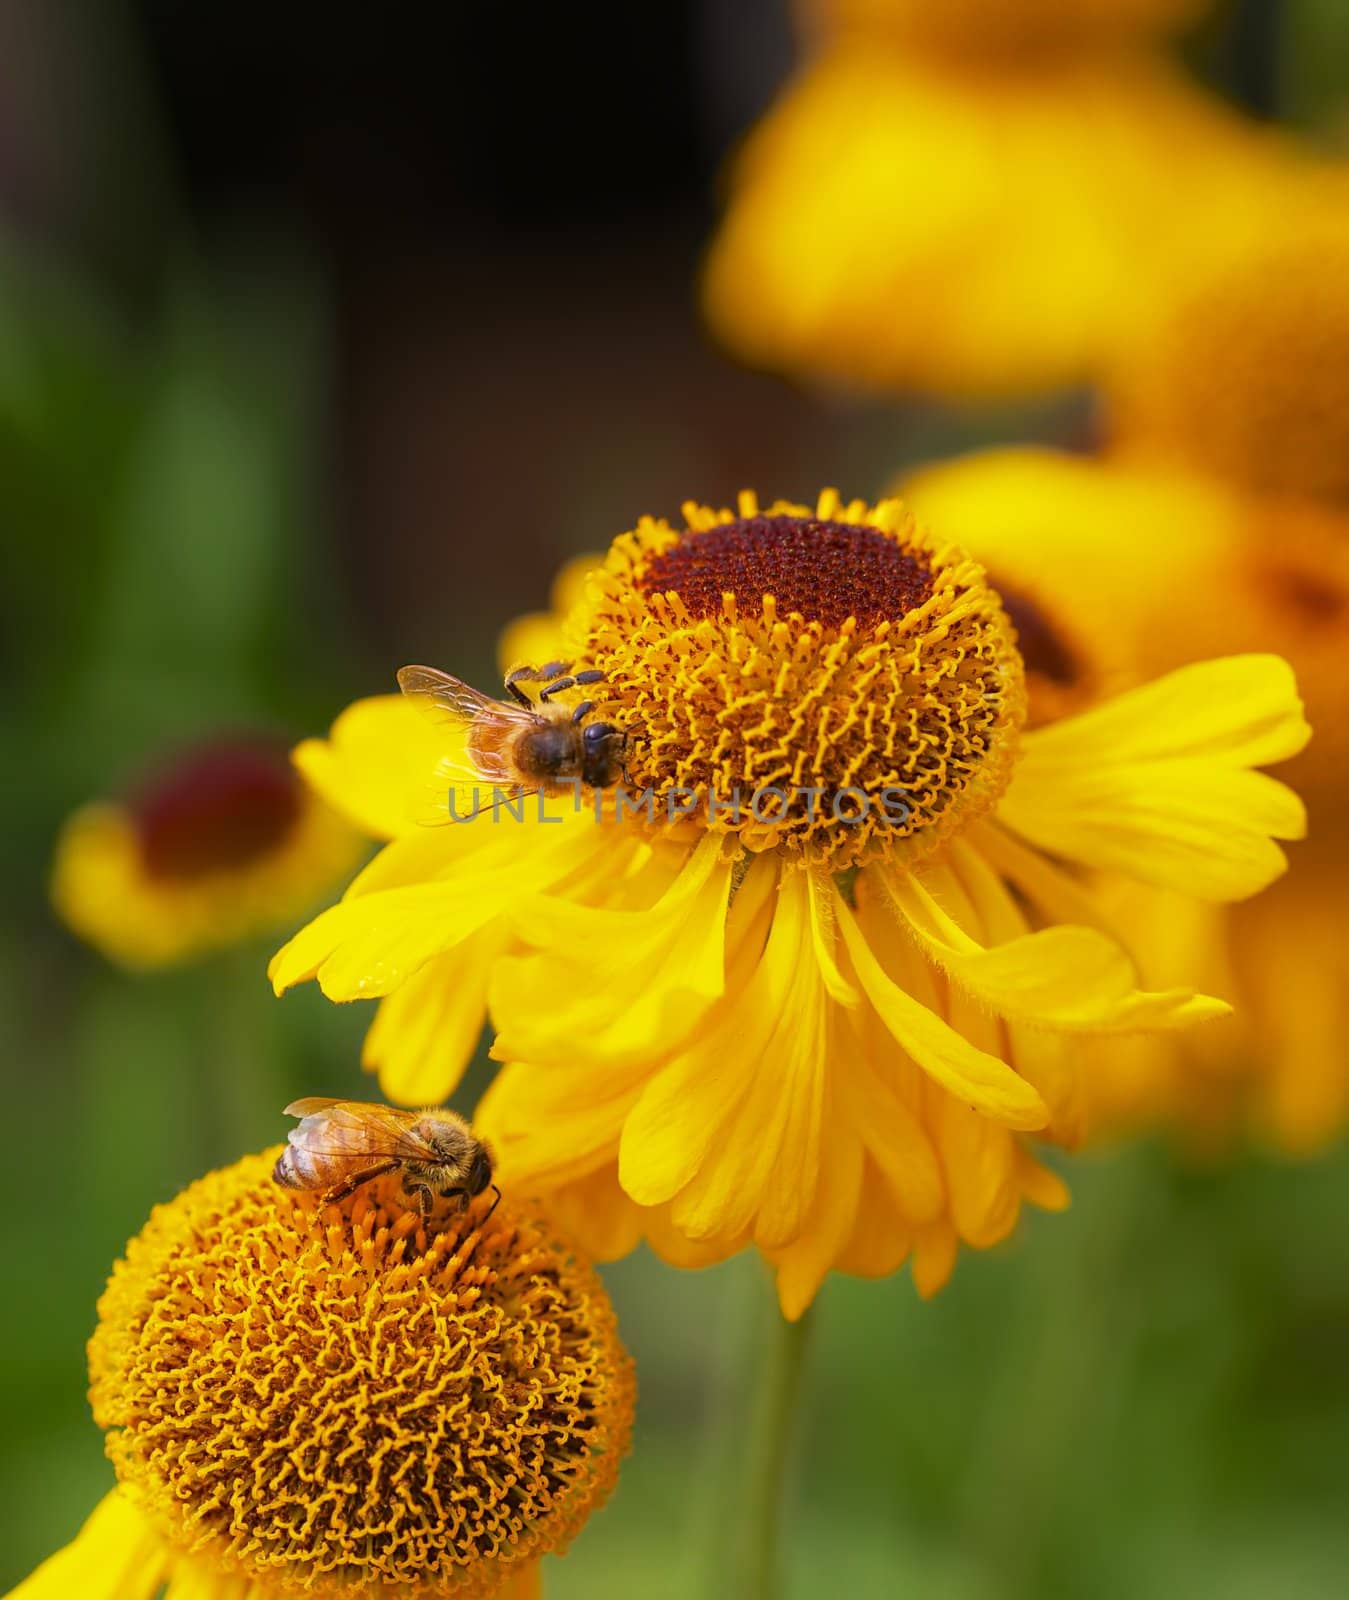 Yellow Cone Flowers with Bees by bobkeenan